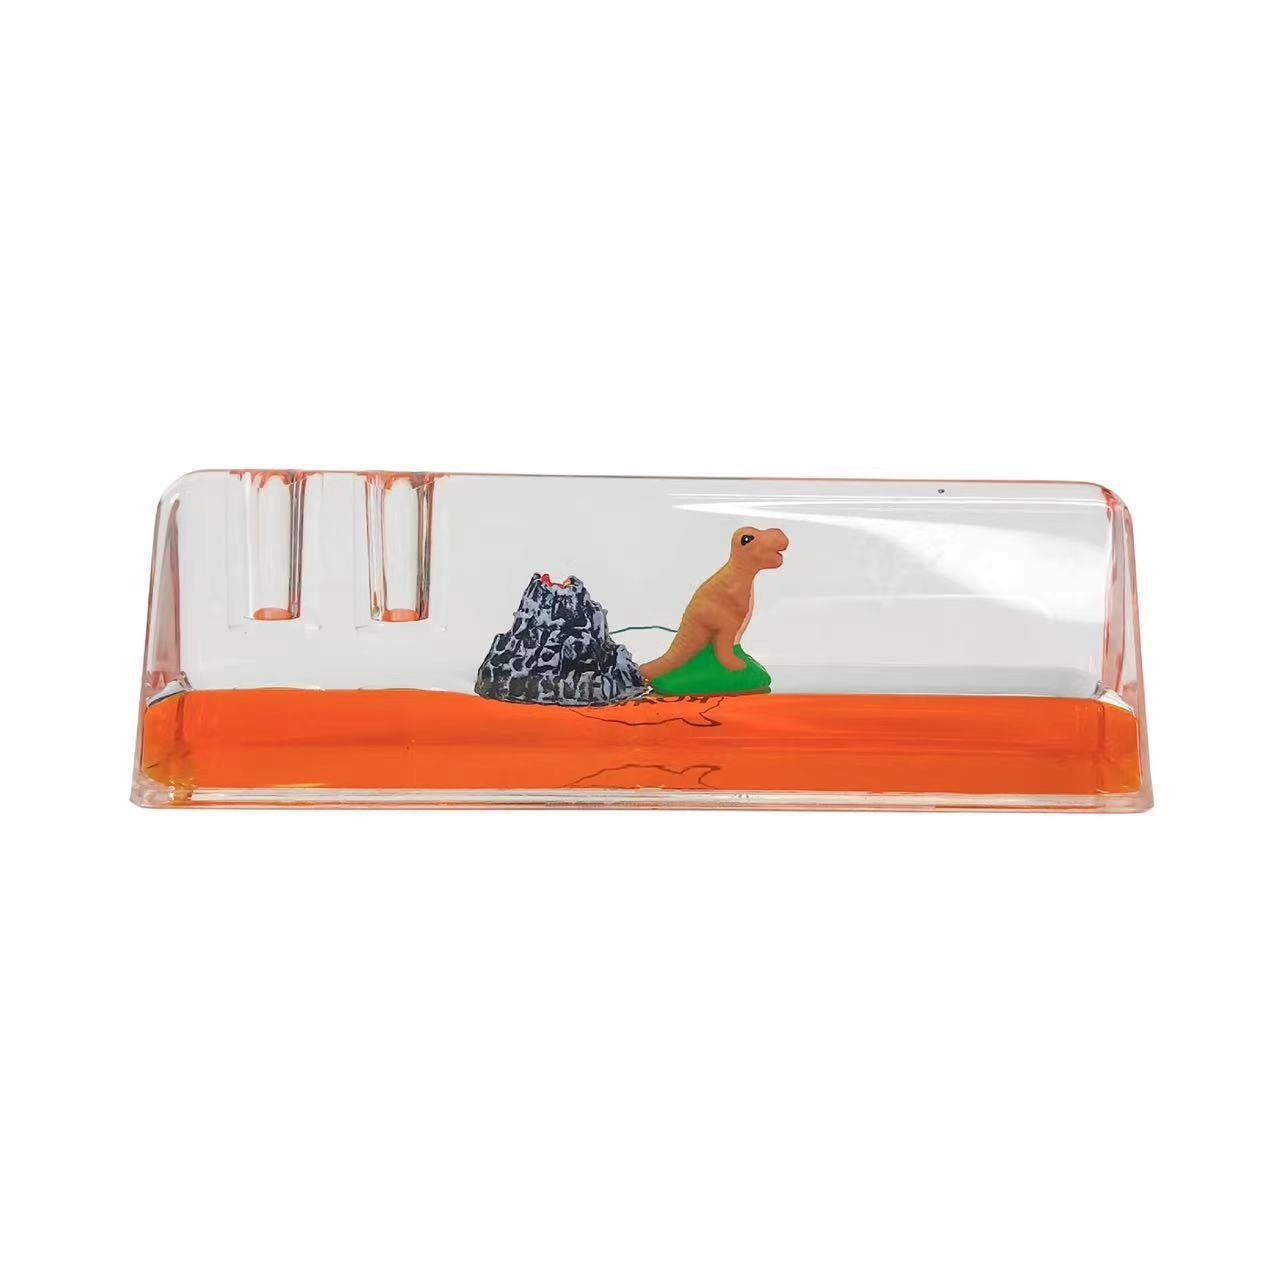 Creative Pen Holder - Dinosaurs and Volcanoes Floating in Lava